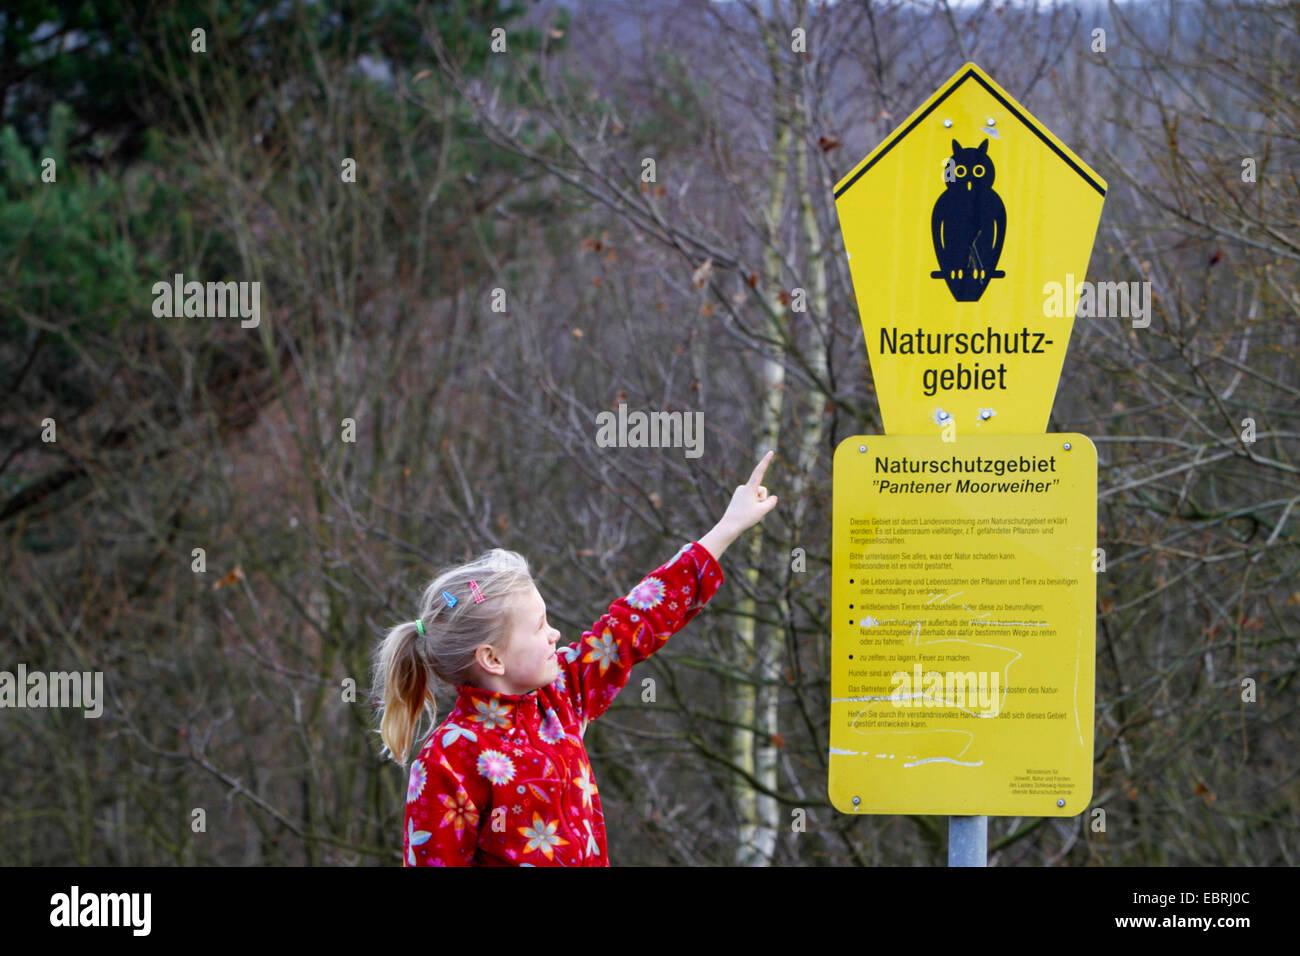 Girl pointing at une Pantener Moorweiher conservation area, Allemagne Banque D'Images